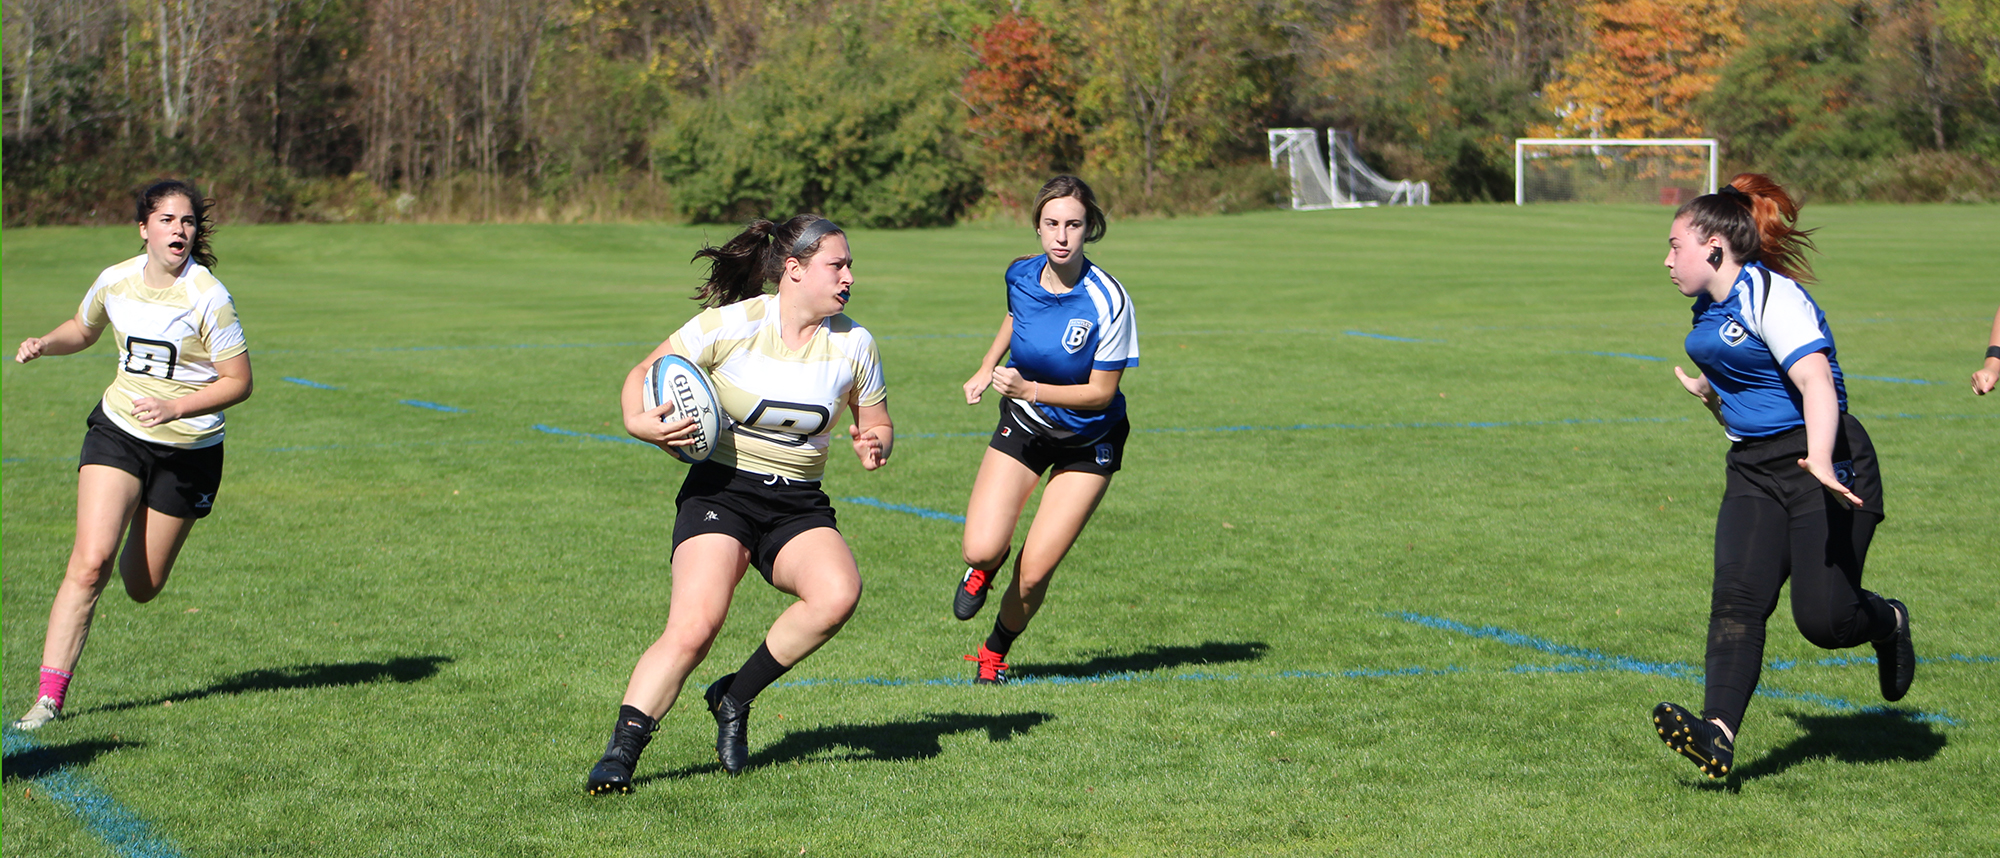 WOMEN’S RUGBY CRUSHES BENTLEY; SENIORS CELEBRATE LAST HOME MATCH